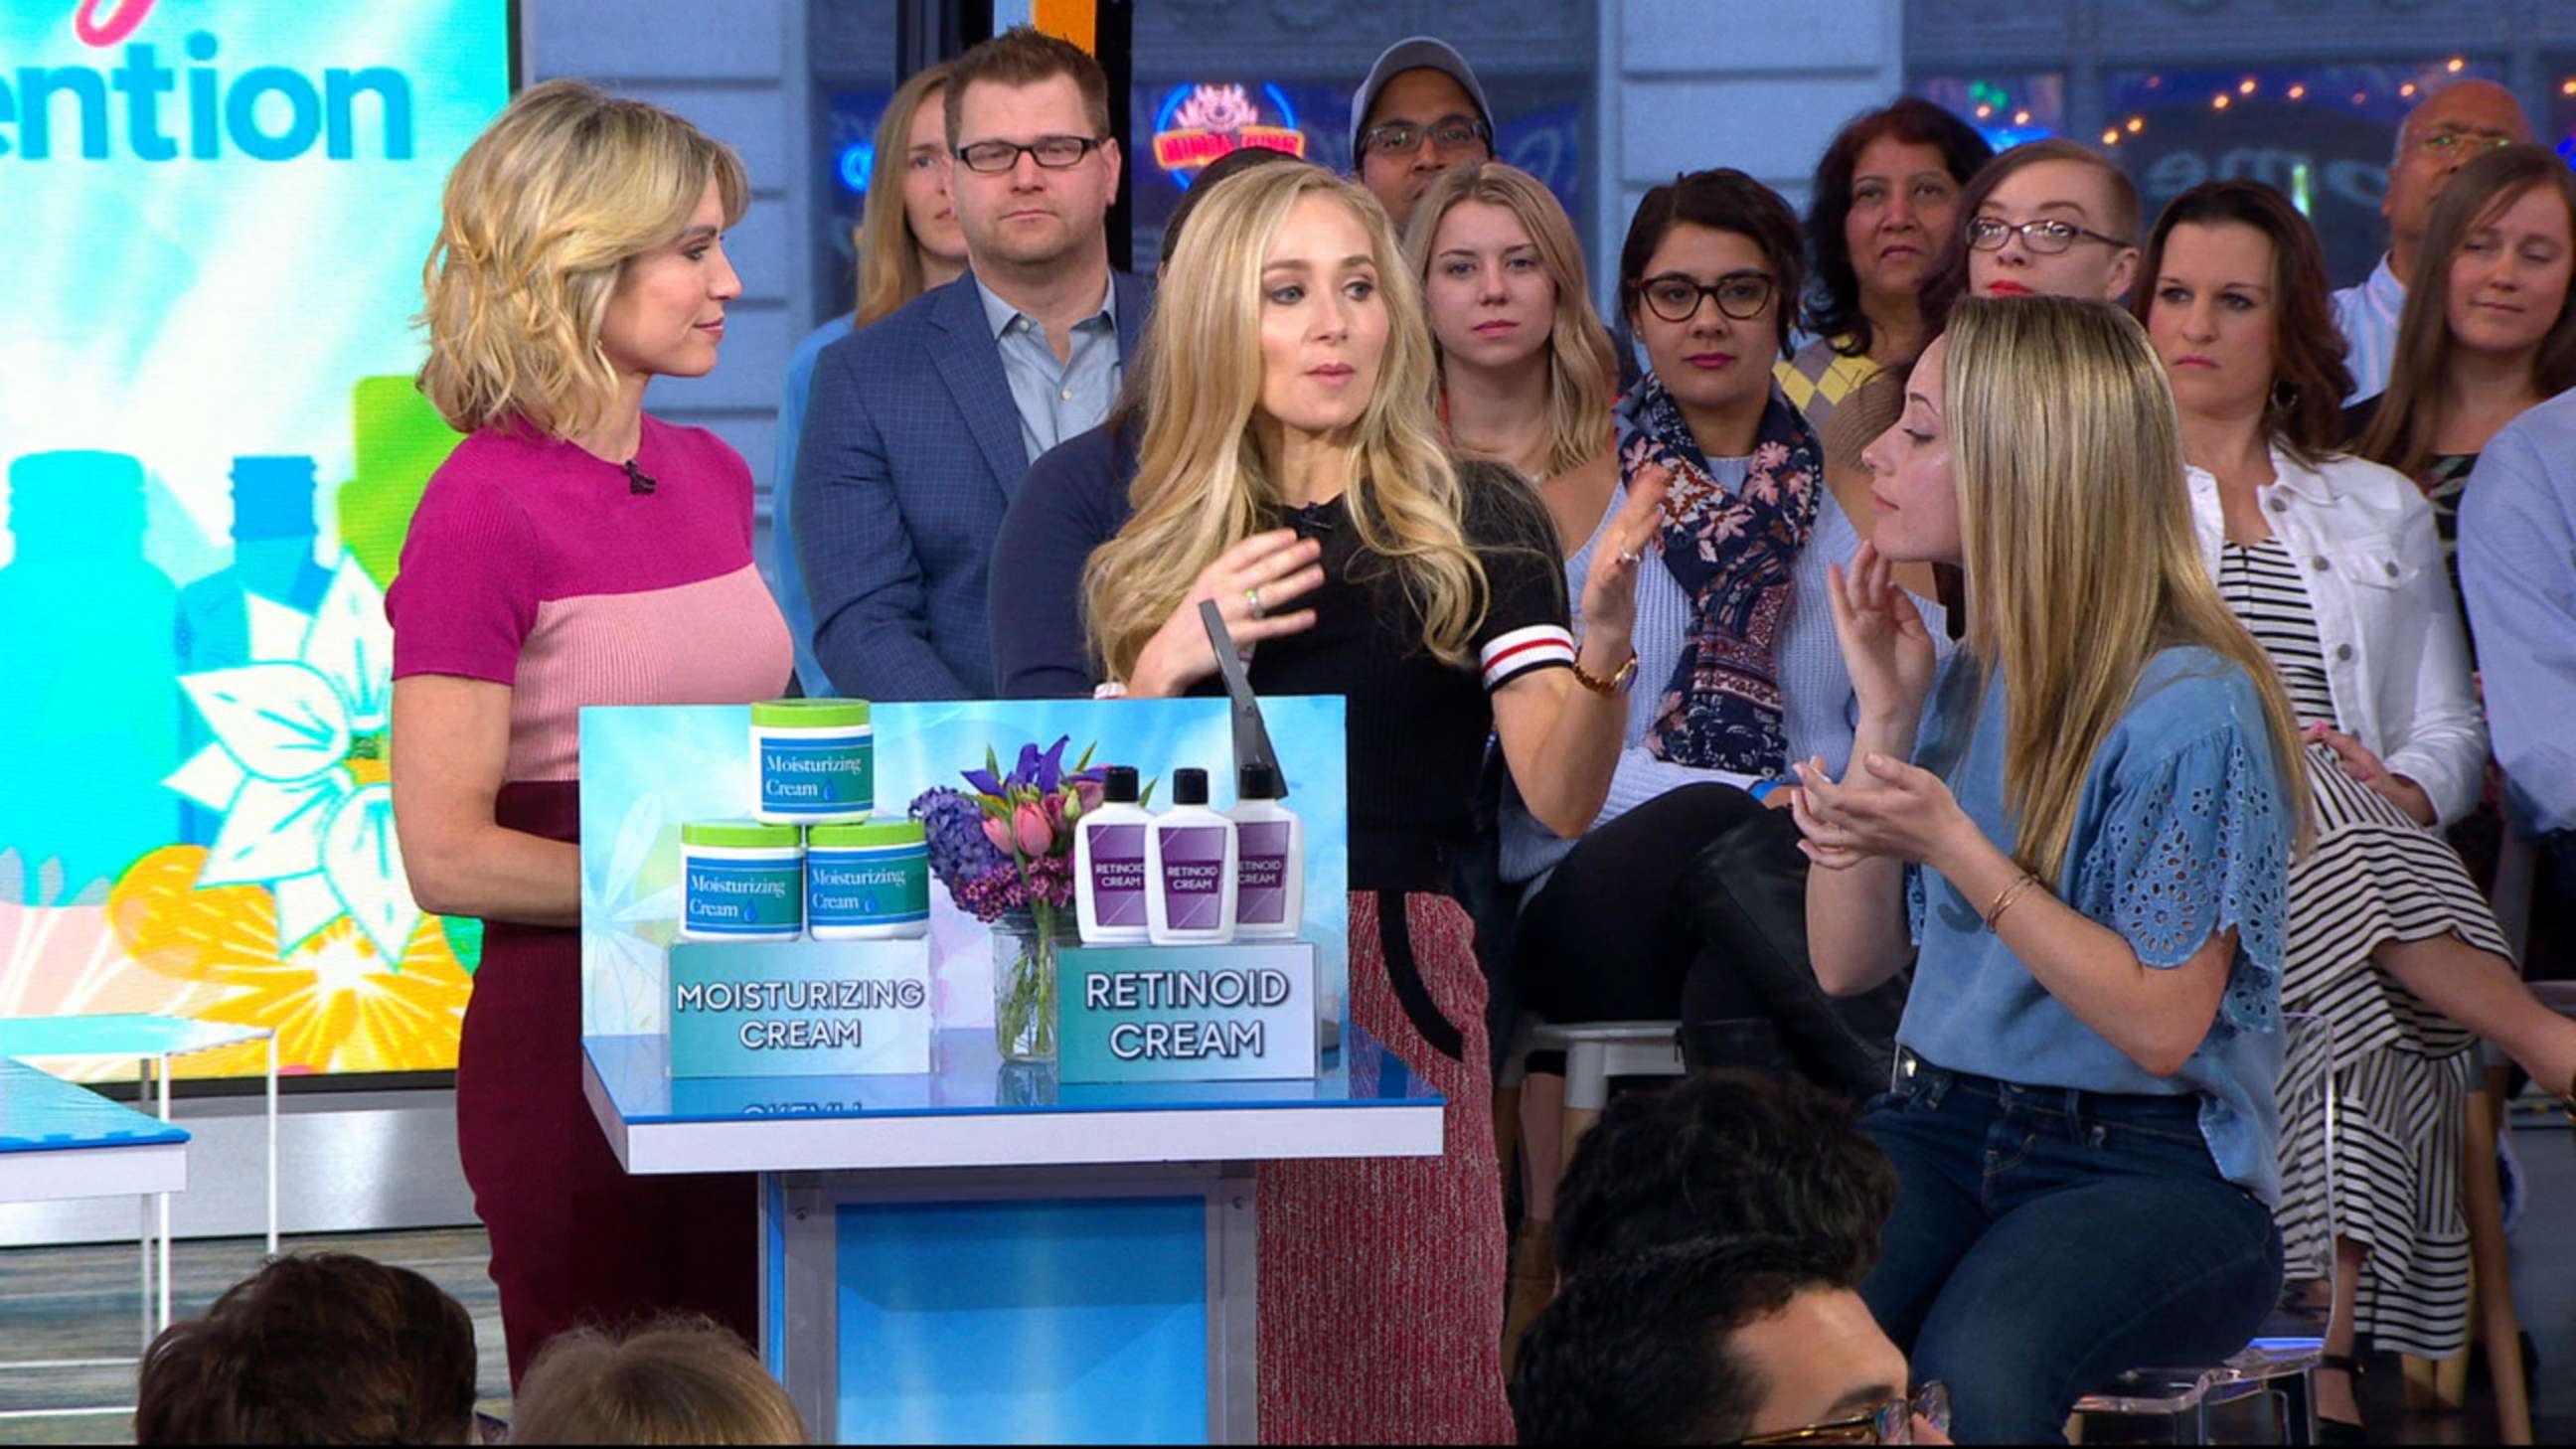 PHOTO: Dr. Whitney Bowe talks about "prejuvenation" and skincare routines to help younger people with anti-aging.